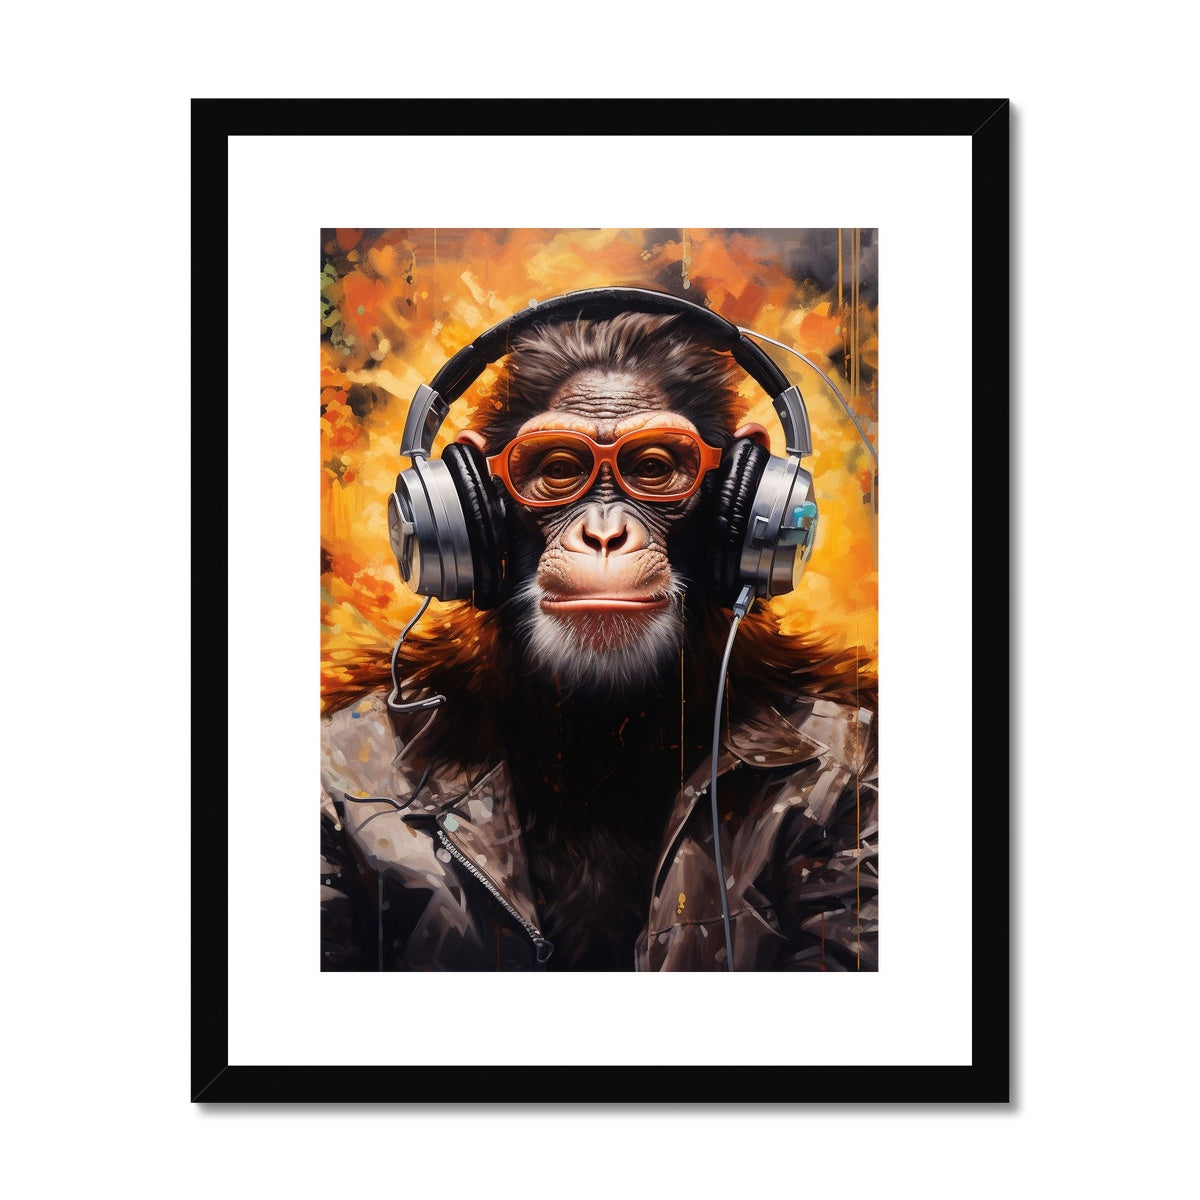 The Don of Music: Limited Edition Framed & Mounted Print